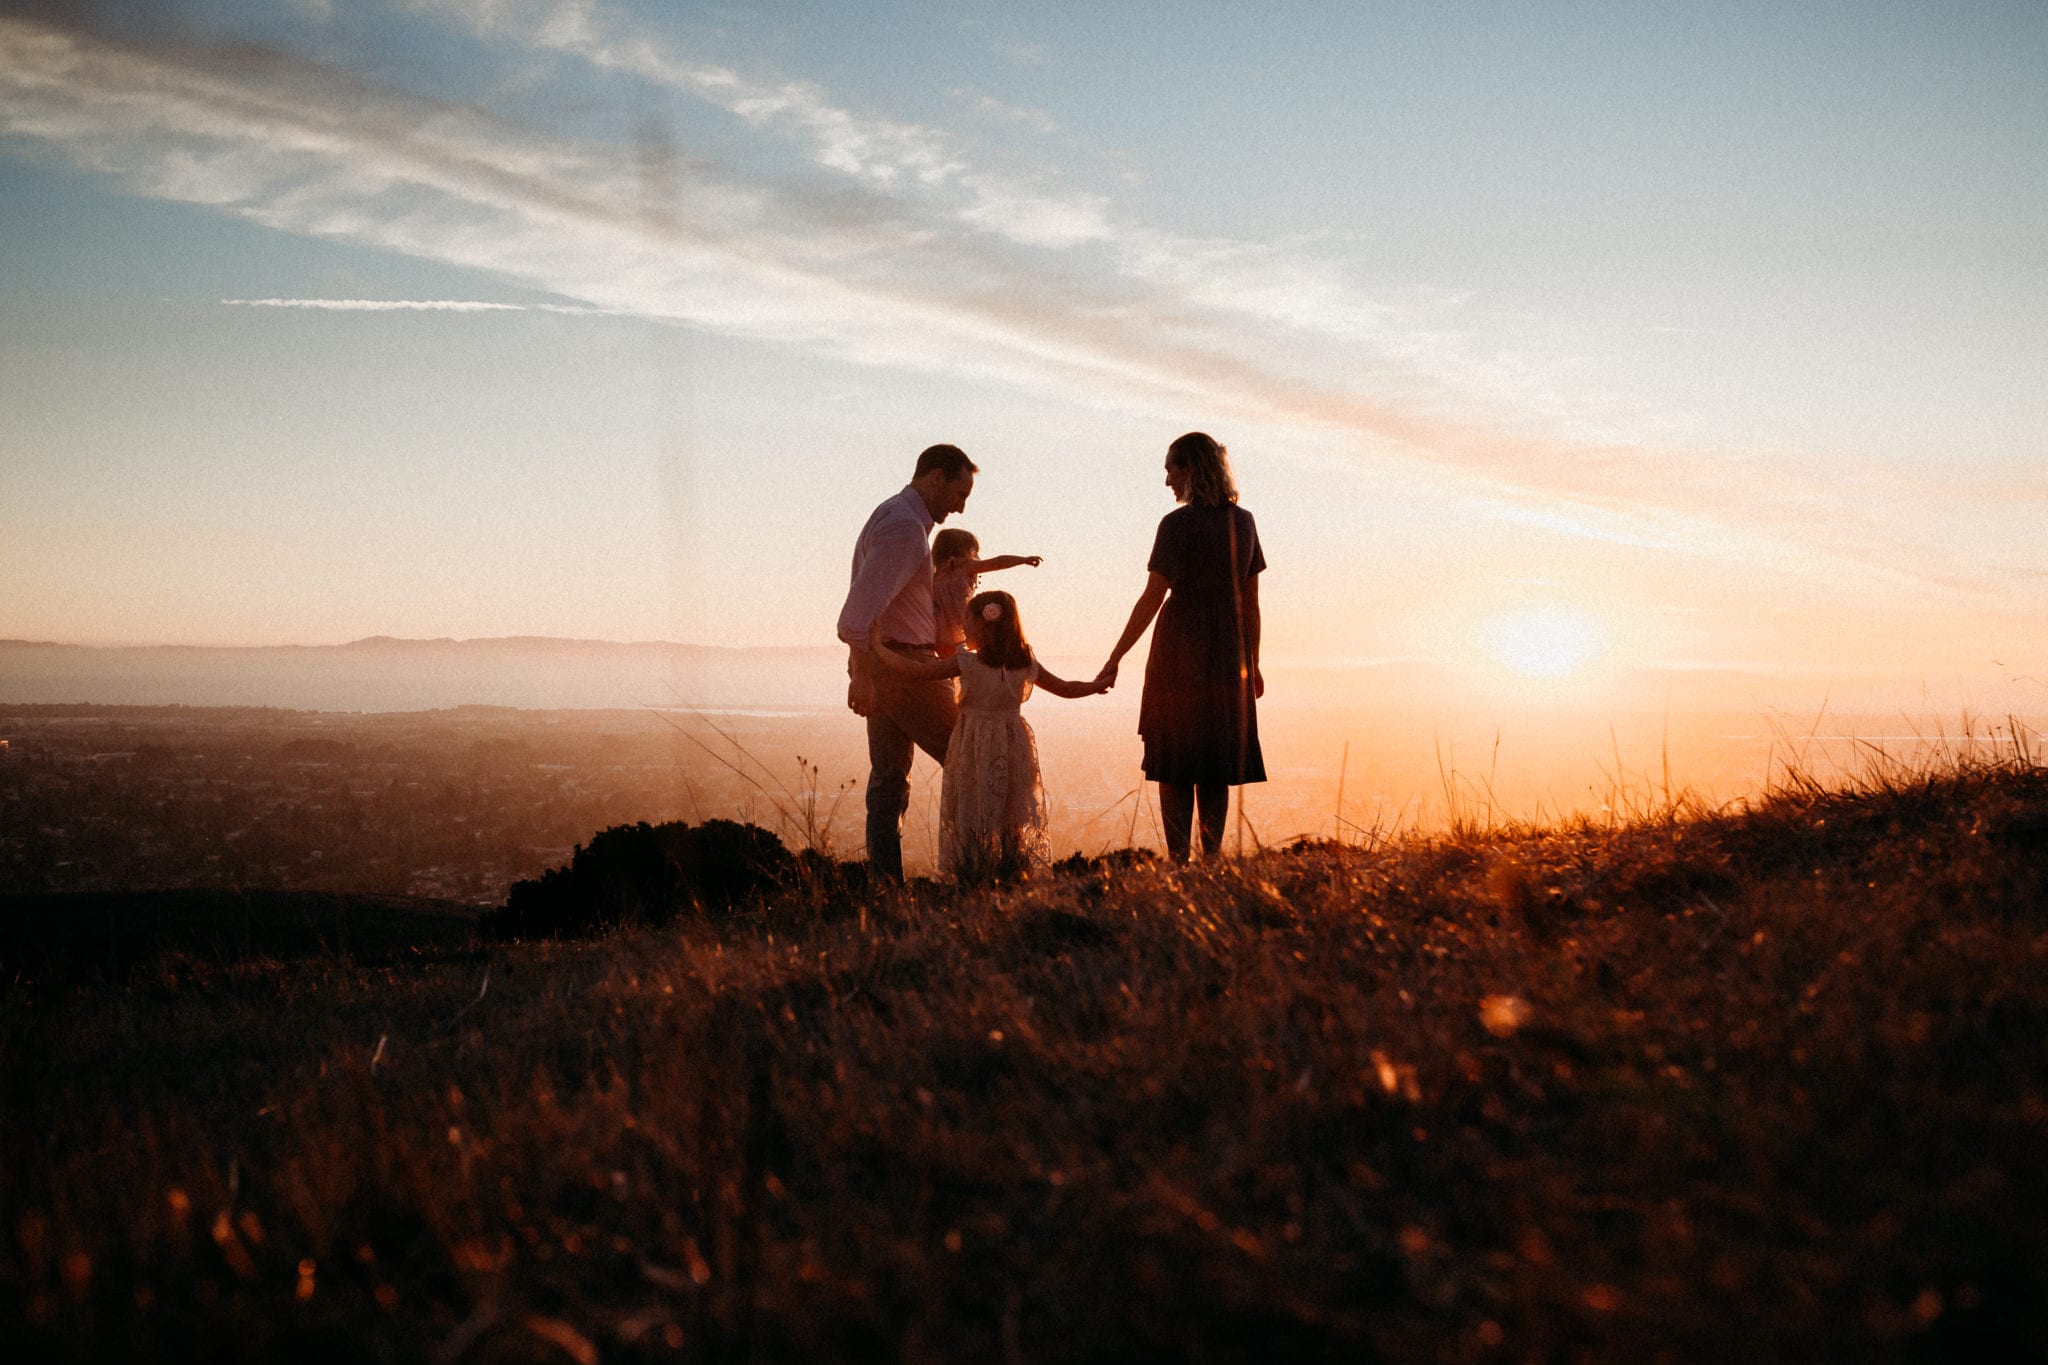 Family Photography golden hour Knowland Park, Oakland CA by Xilo Photography